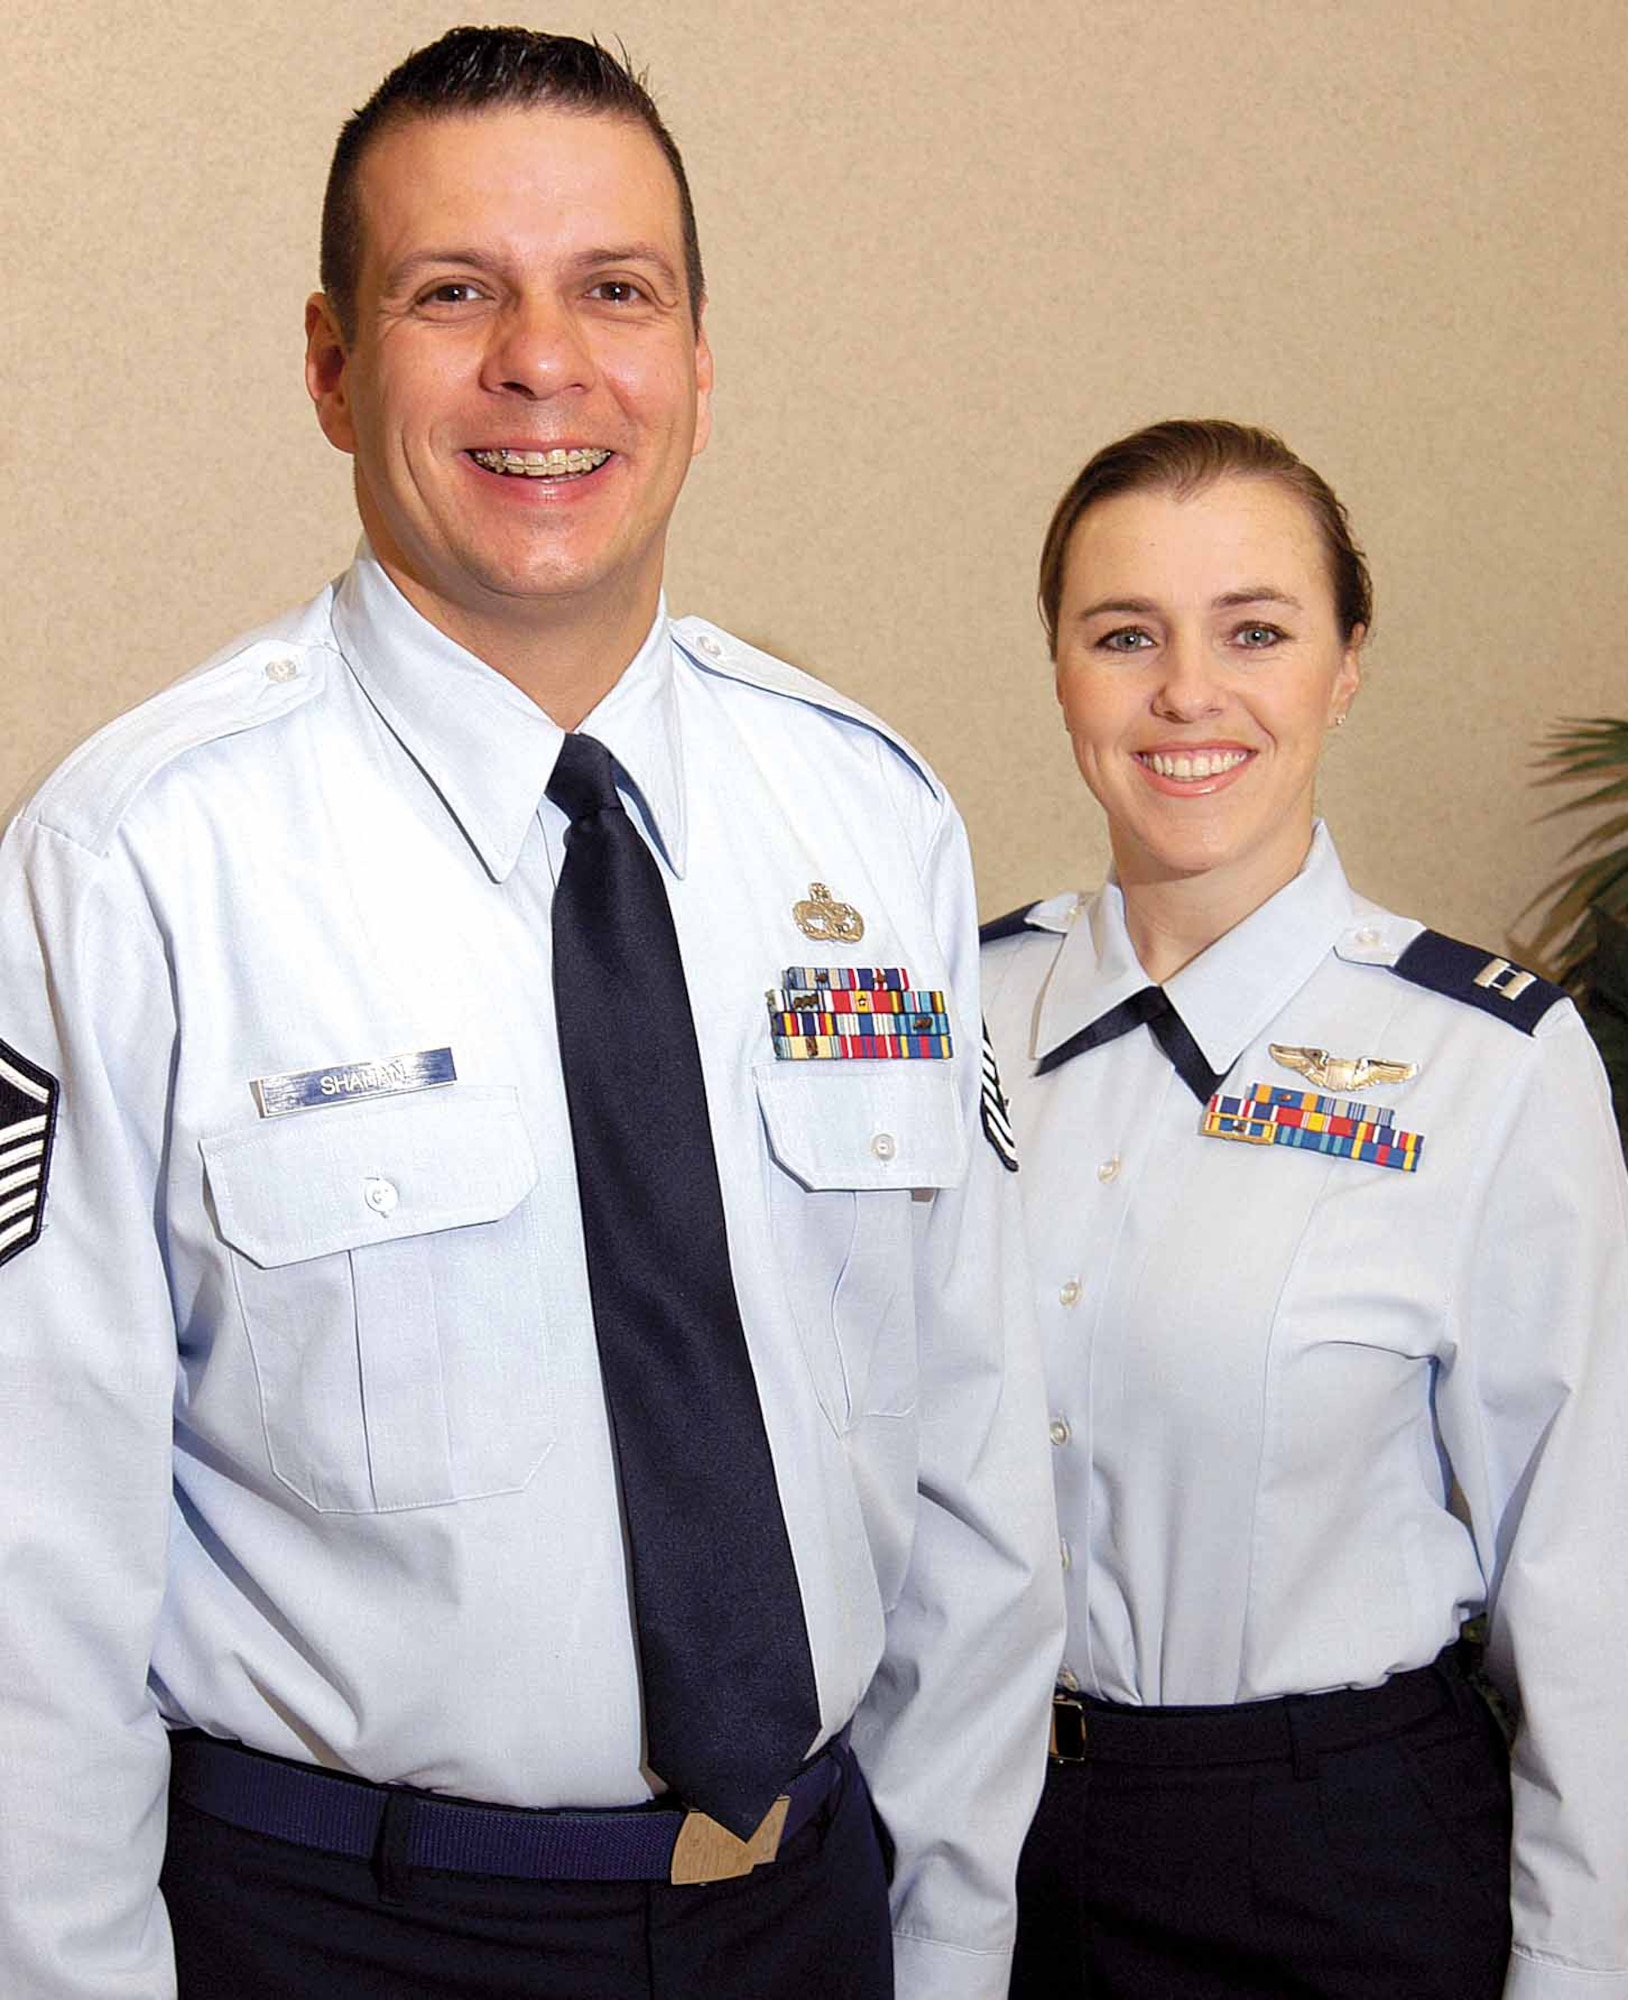 On the last work day of each month, between now and March 31, AFMC Airmen must wear a long sleeve shirt and tie or tie tab, as shown by Master Sgt. Rob Shahan and Capt. Katrina Hightower, Oklahoma City Air Logistics Center Director of Staff Protocol. (Air Force photo by Margo Wright)